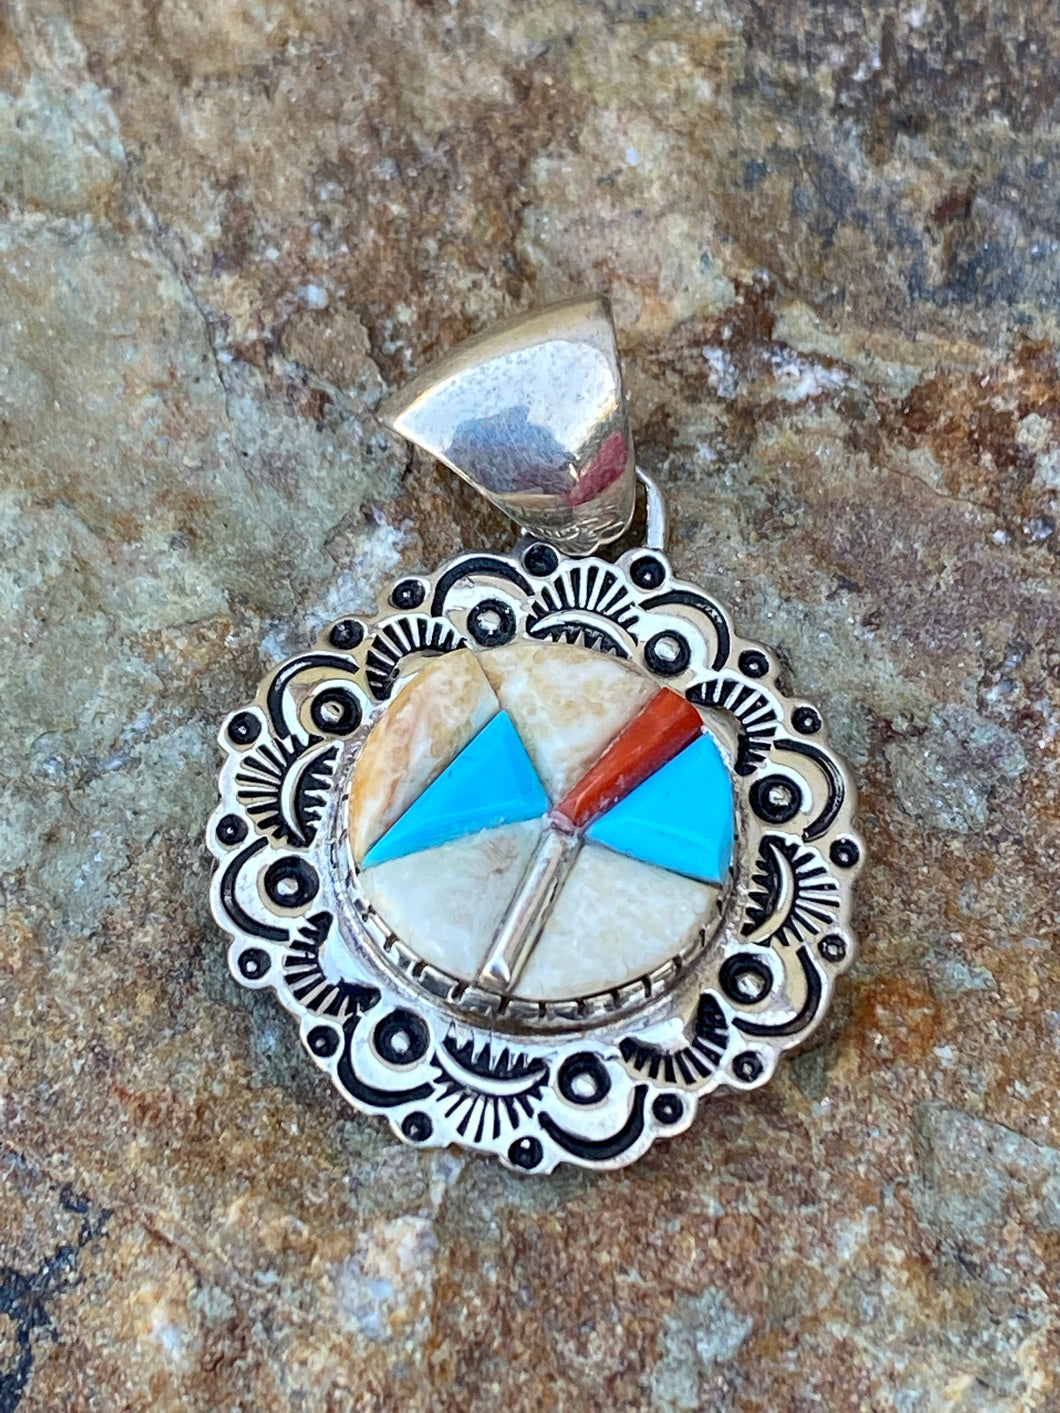 Navajo Turquoise, Coral & Mother of Pearl Pendant Necklace